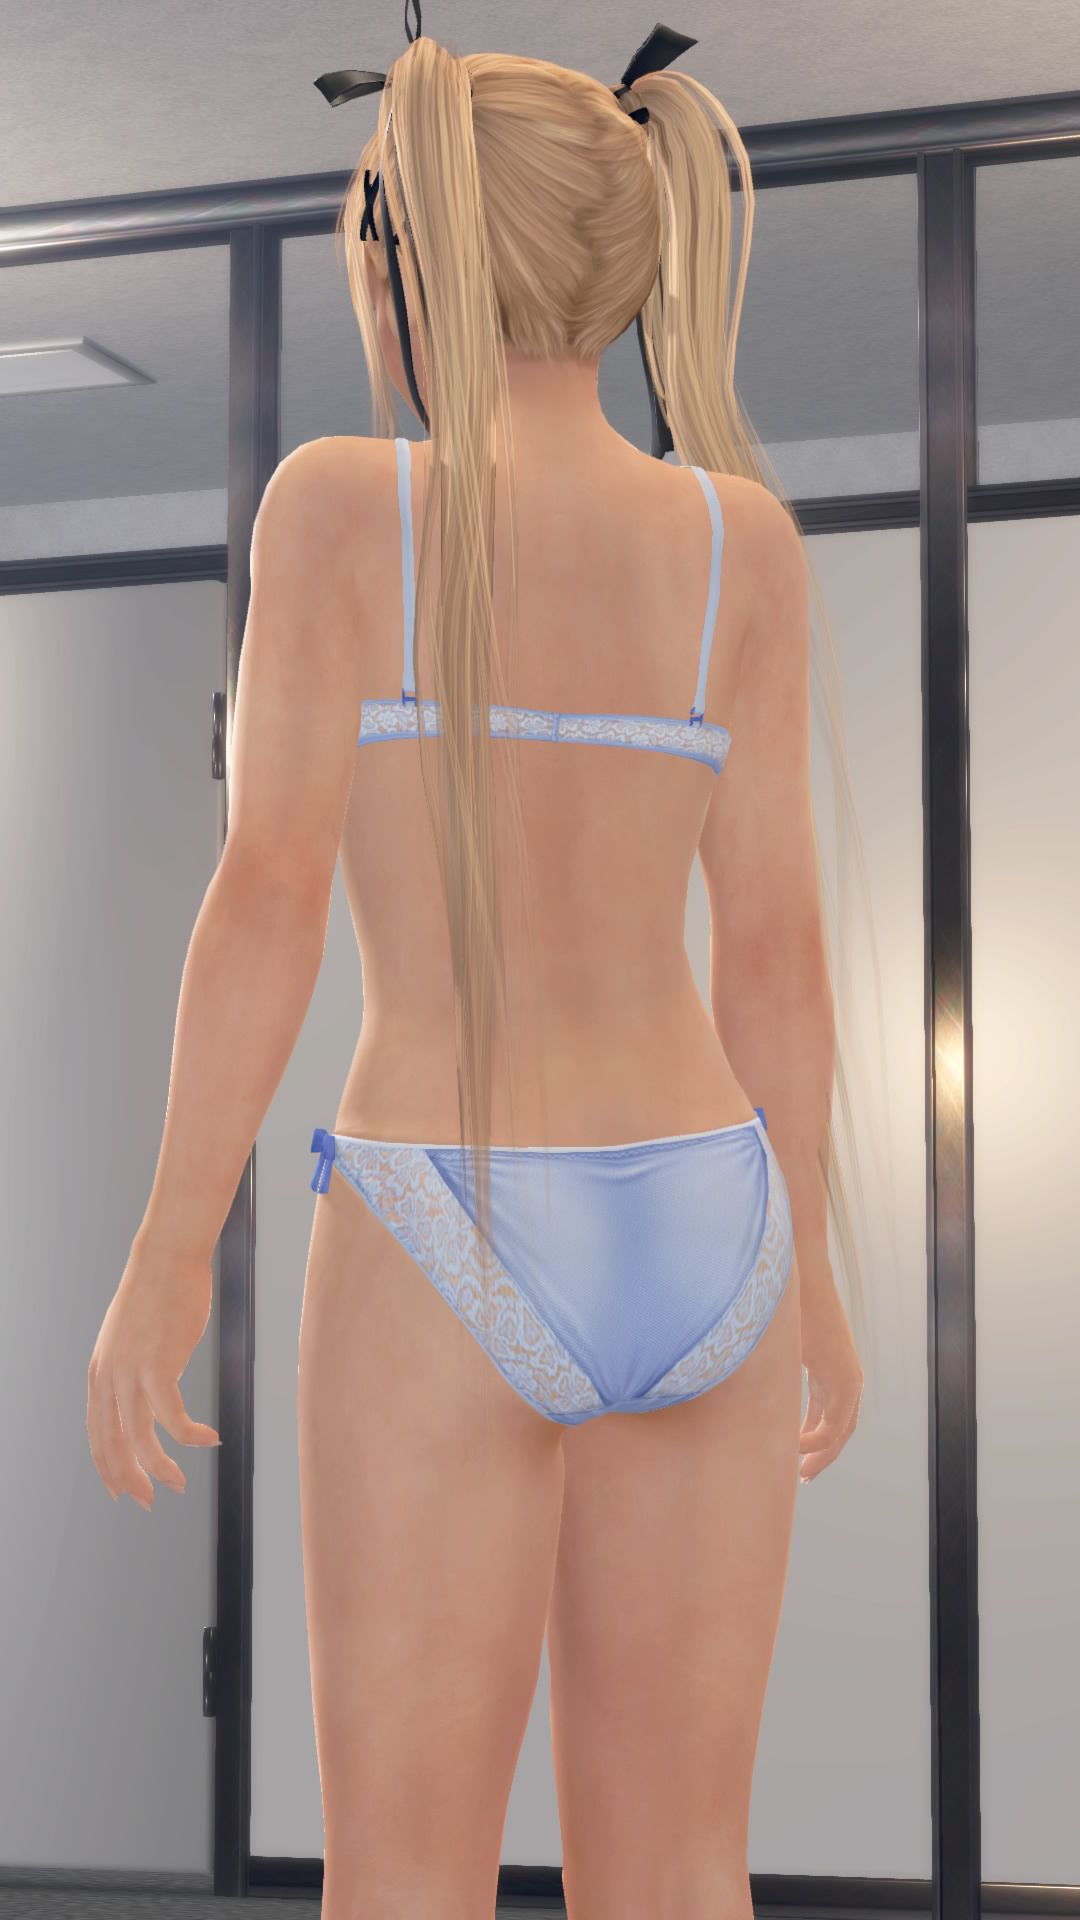 DOAX3 recommend private shooting Association (Division of Rose-Marie) in swimsuit 30